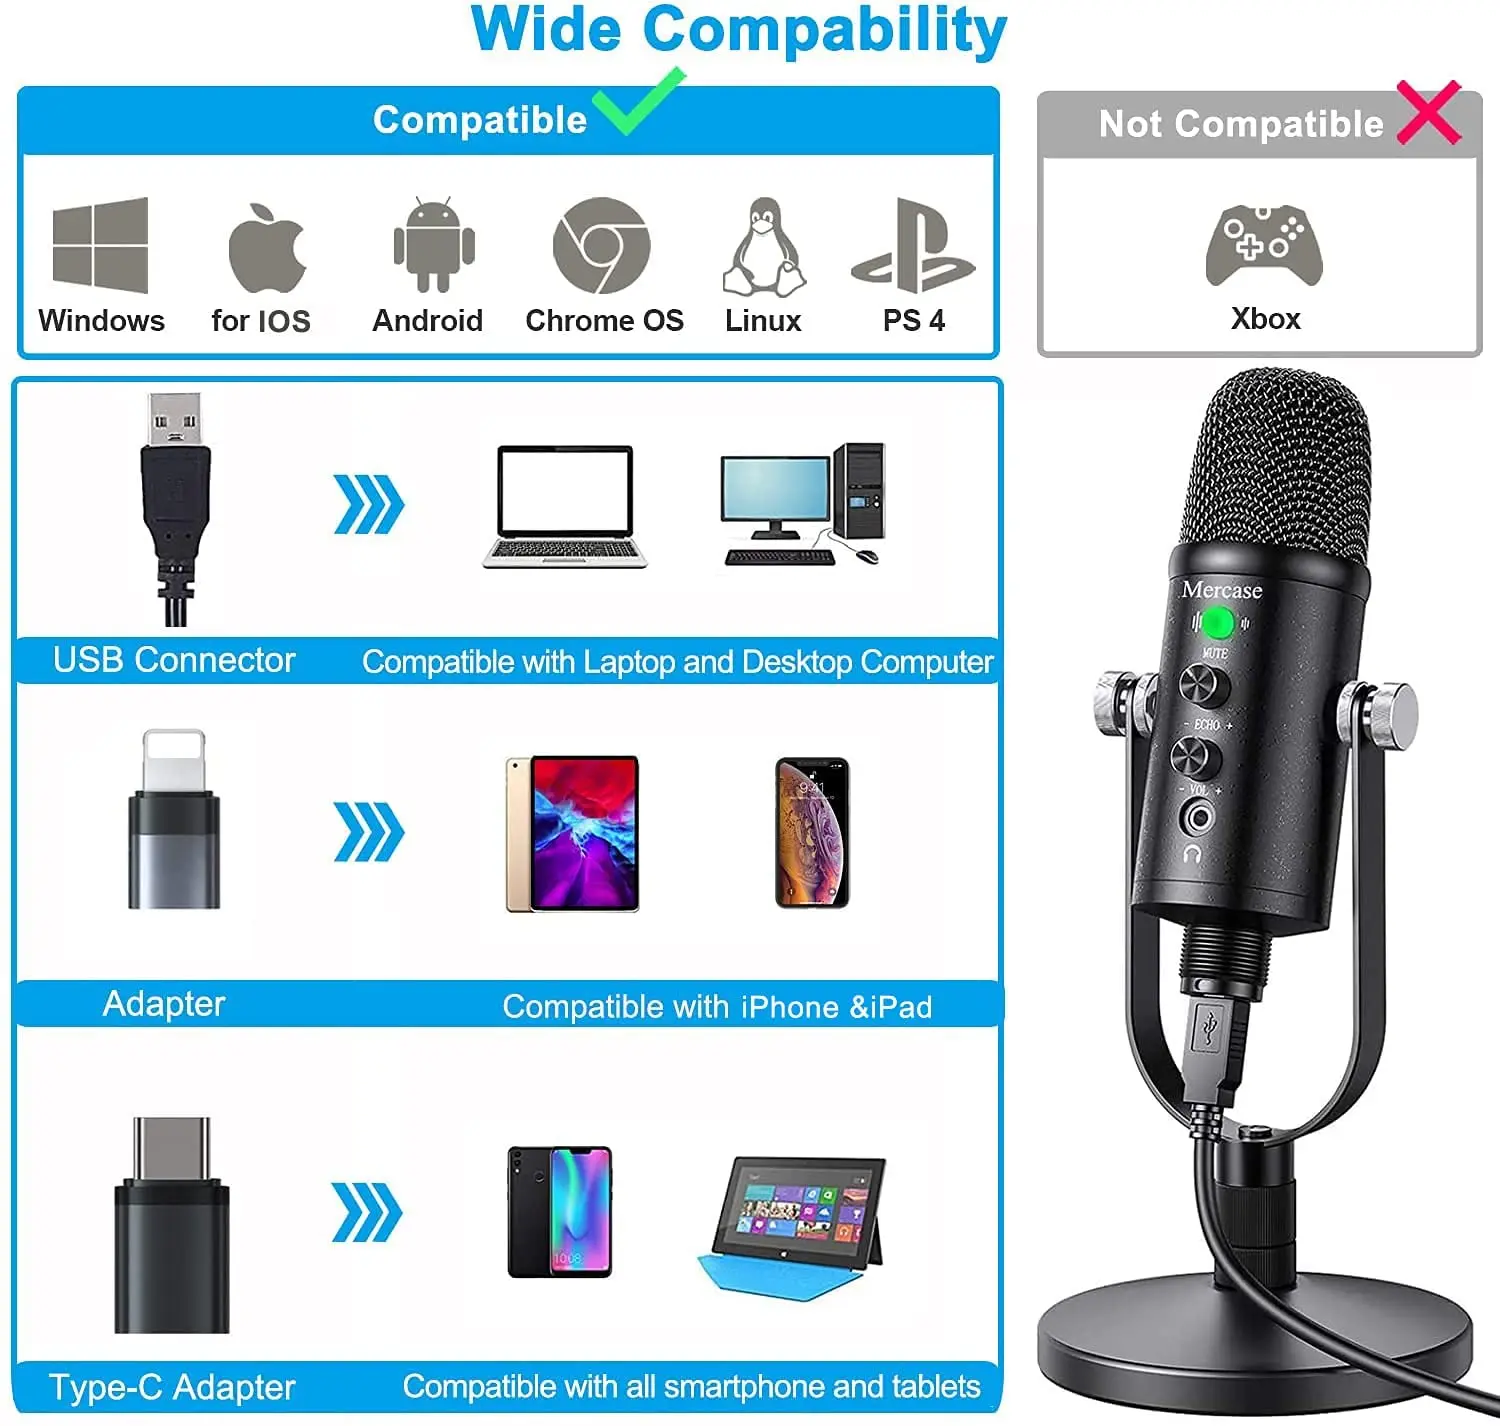 Mercase USB Condenser Microphone Compatible with PC/MAC/Ps4/iPhone 